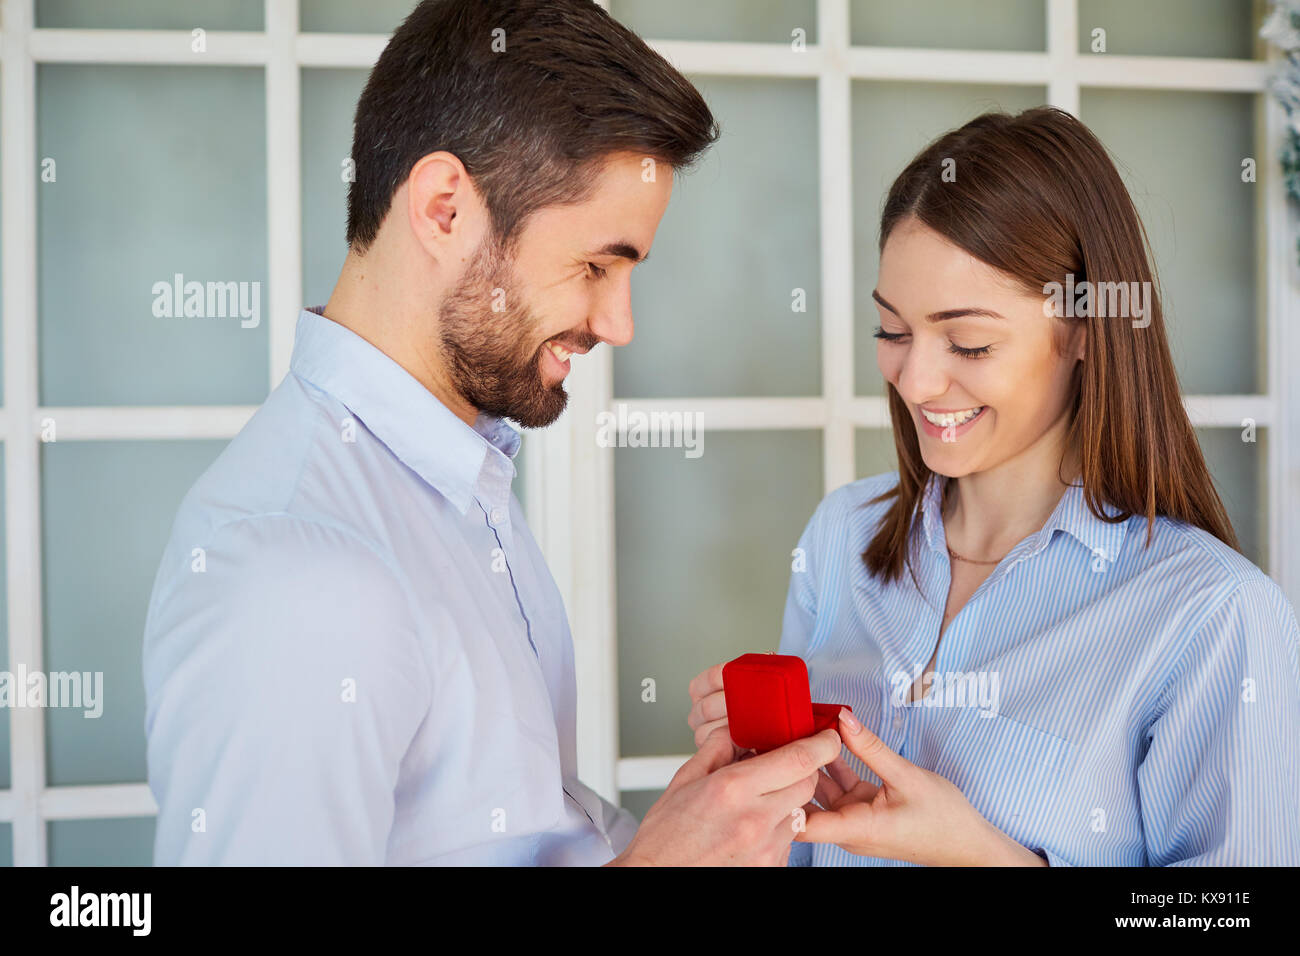 Proposal man asking marry to his girlfriend. Stock Photo